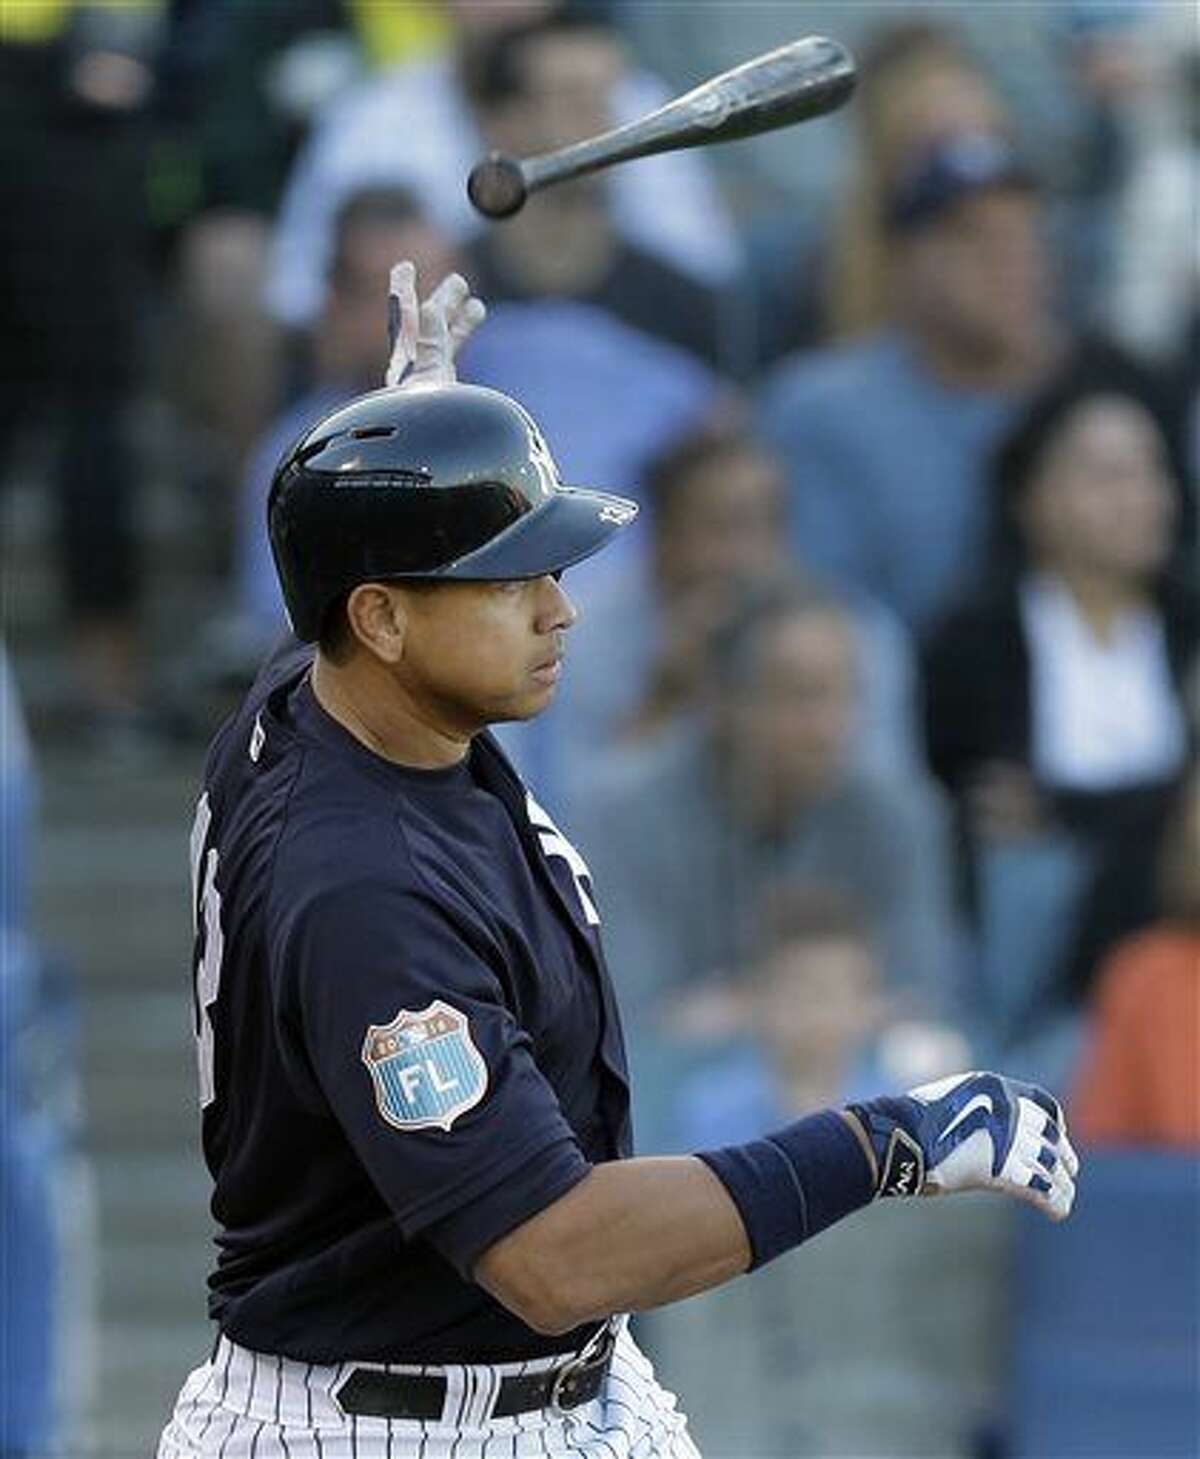 New York Yankees' Alex Rodriguez flips his bat as he watches his two-run single off New York Mets starting pitcher Steven Matz during the second inning of a spring training baseball game Tuesday, March 22, 2016, in Tampa, Fla. Yankees' Brett Gardner and Didi Gregorius both scored on the hit. (AP Photo/Chris O'Meara)